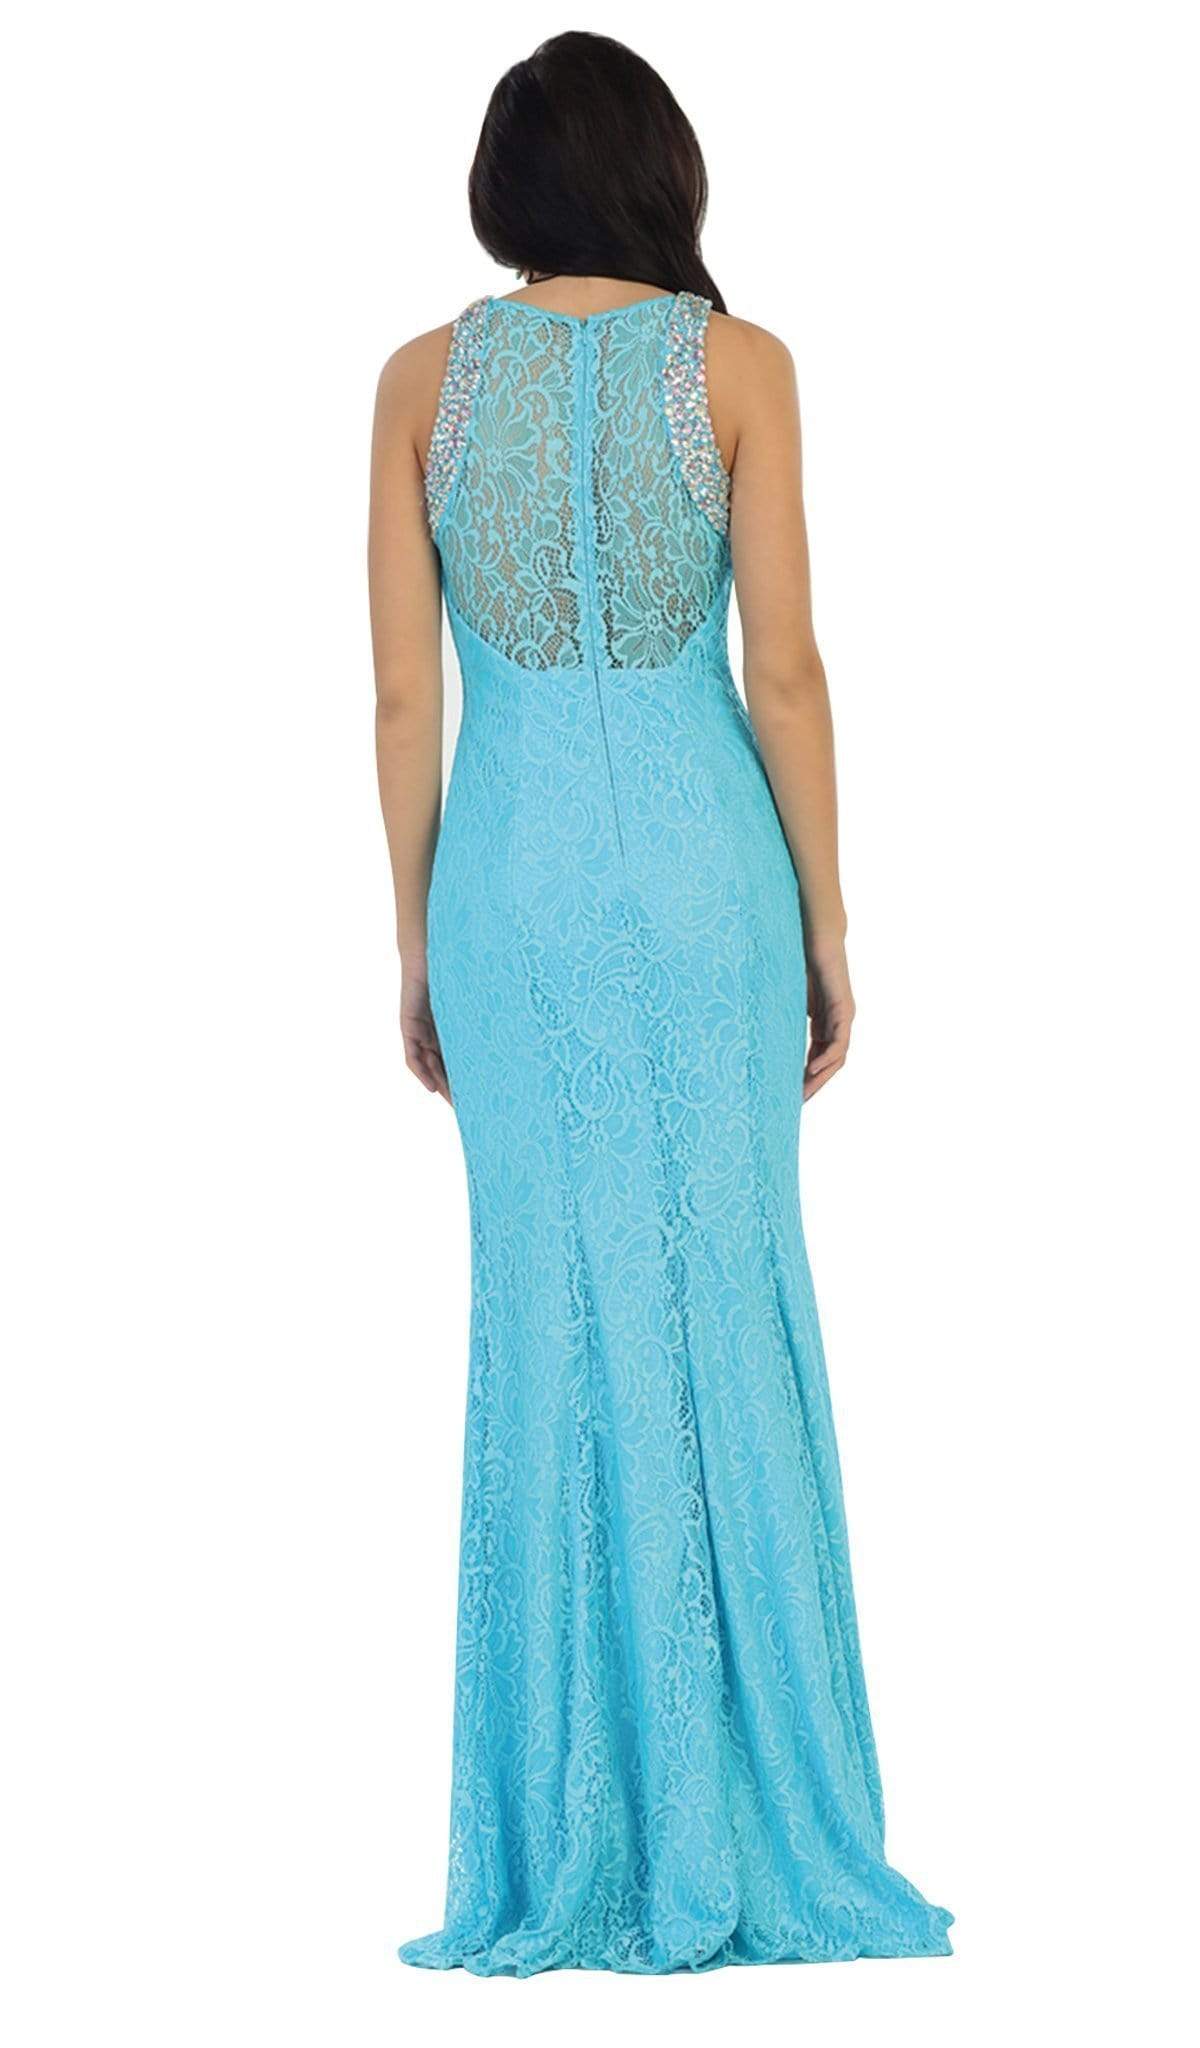 May Queen - Elegant Sleeveless Rhinestone Lace Prom Dress Special Occasion Dress